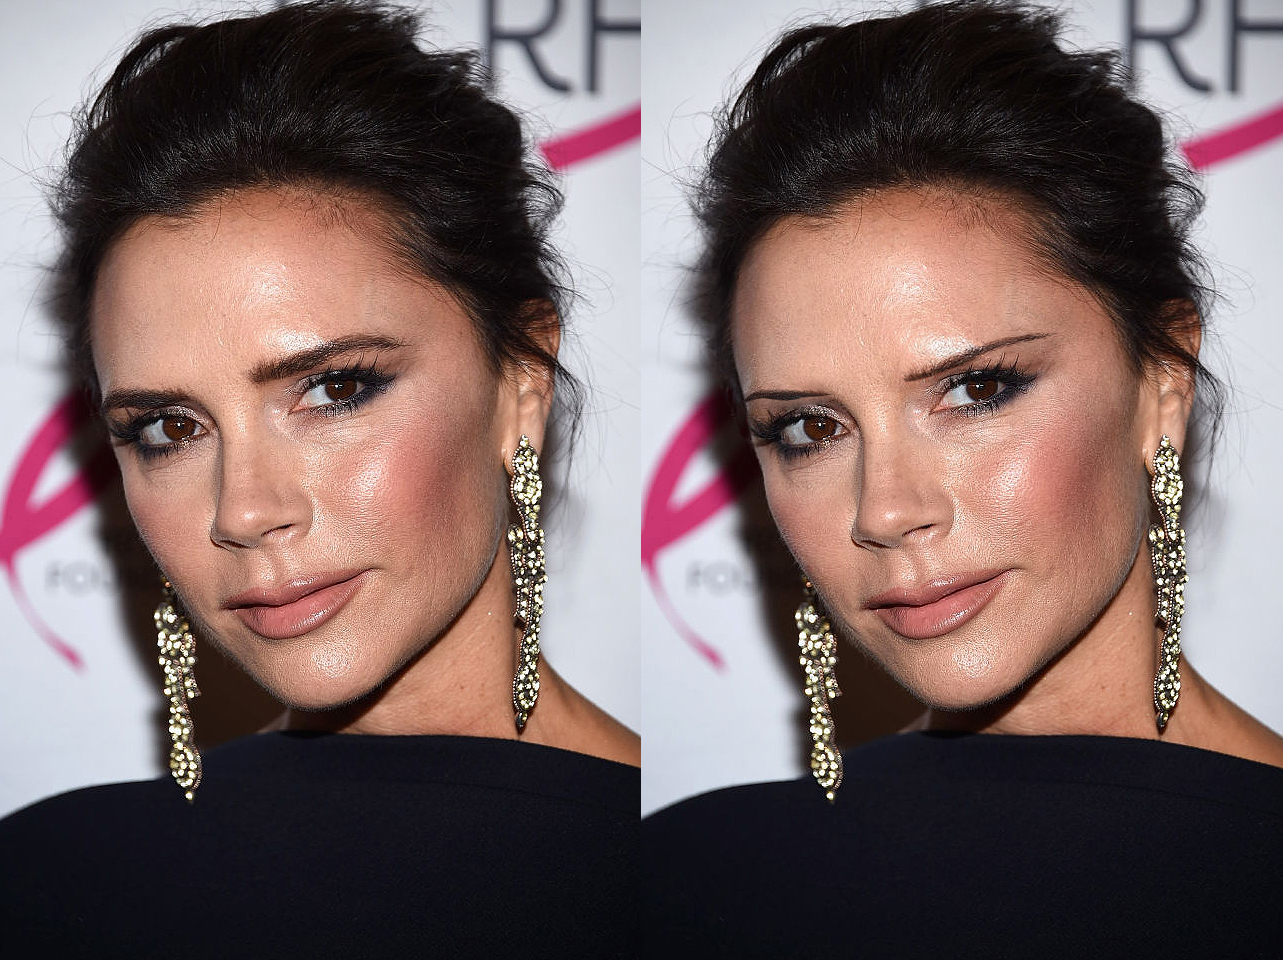 Victoria Beckham's signature brows from 2017 vs a digitally edited thin-brow look | Source: Getty Images